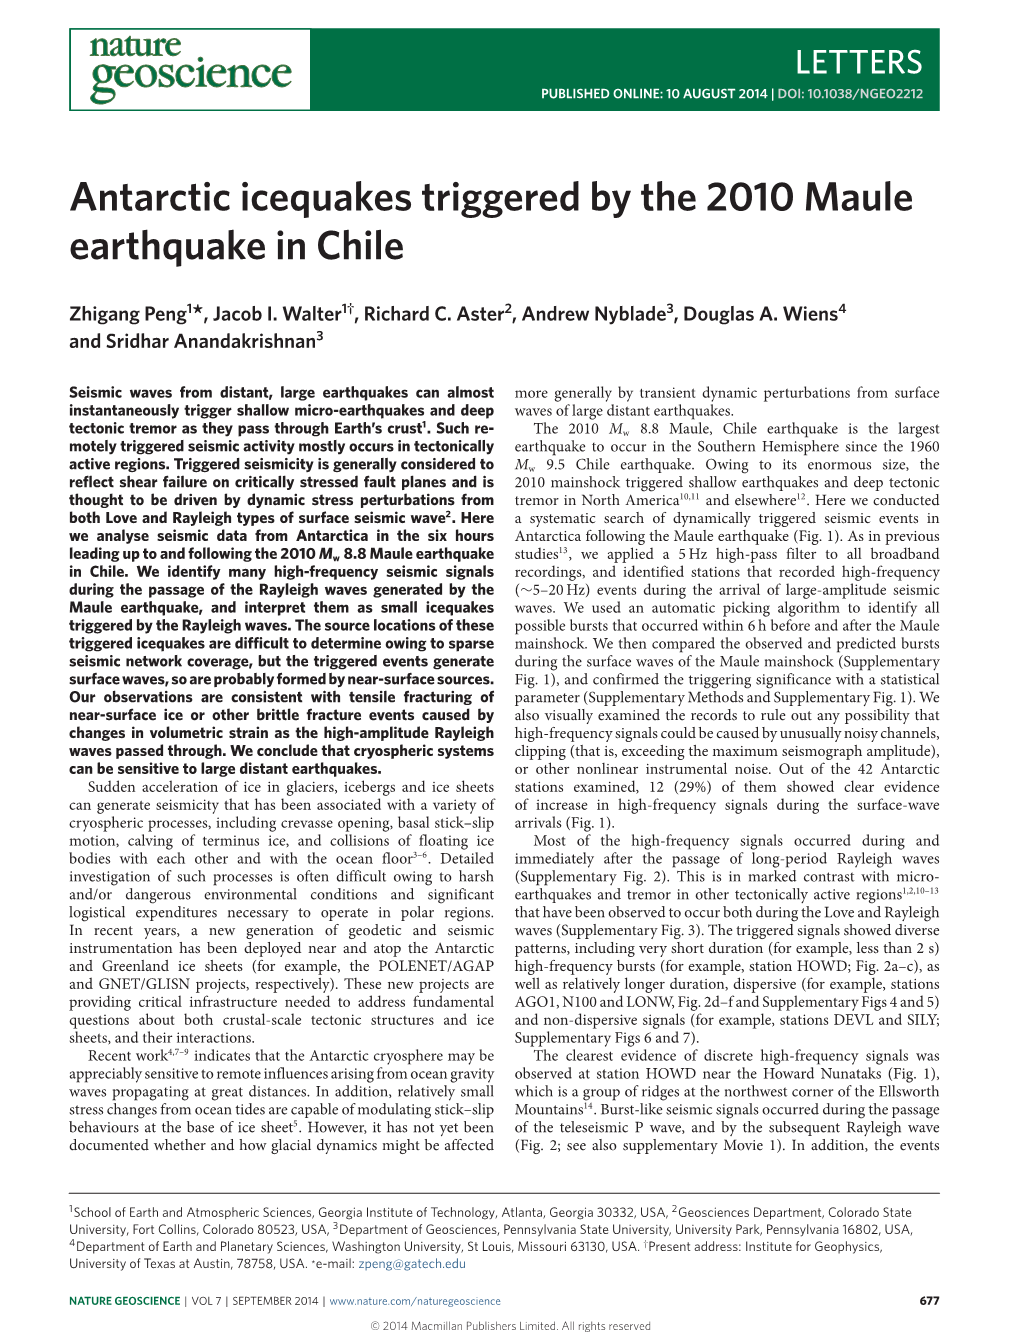 Antarctic Icequakes Triggered by the 2010 Maule Earthquake in Chile